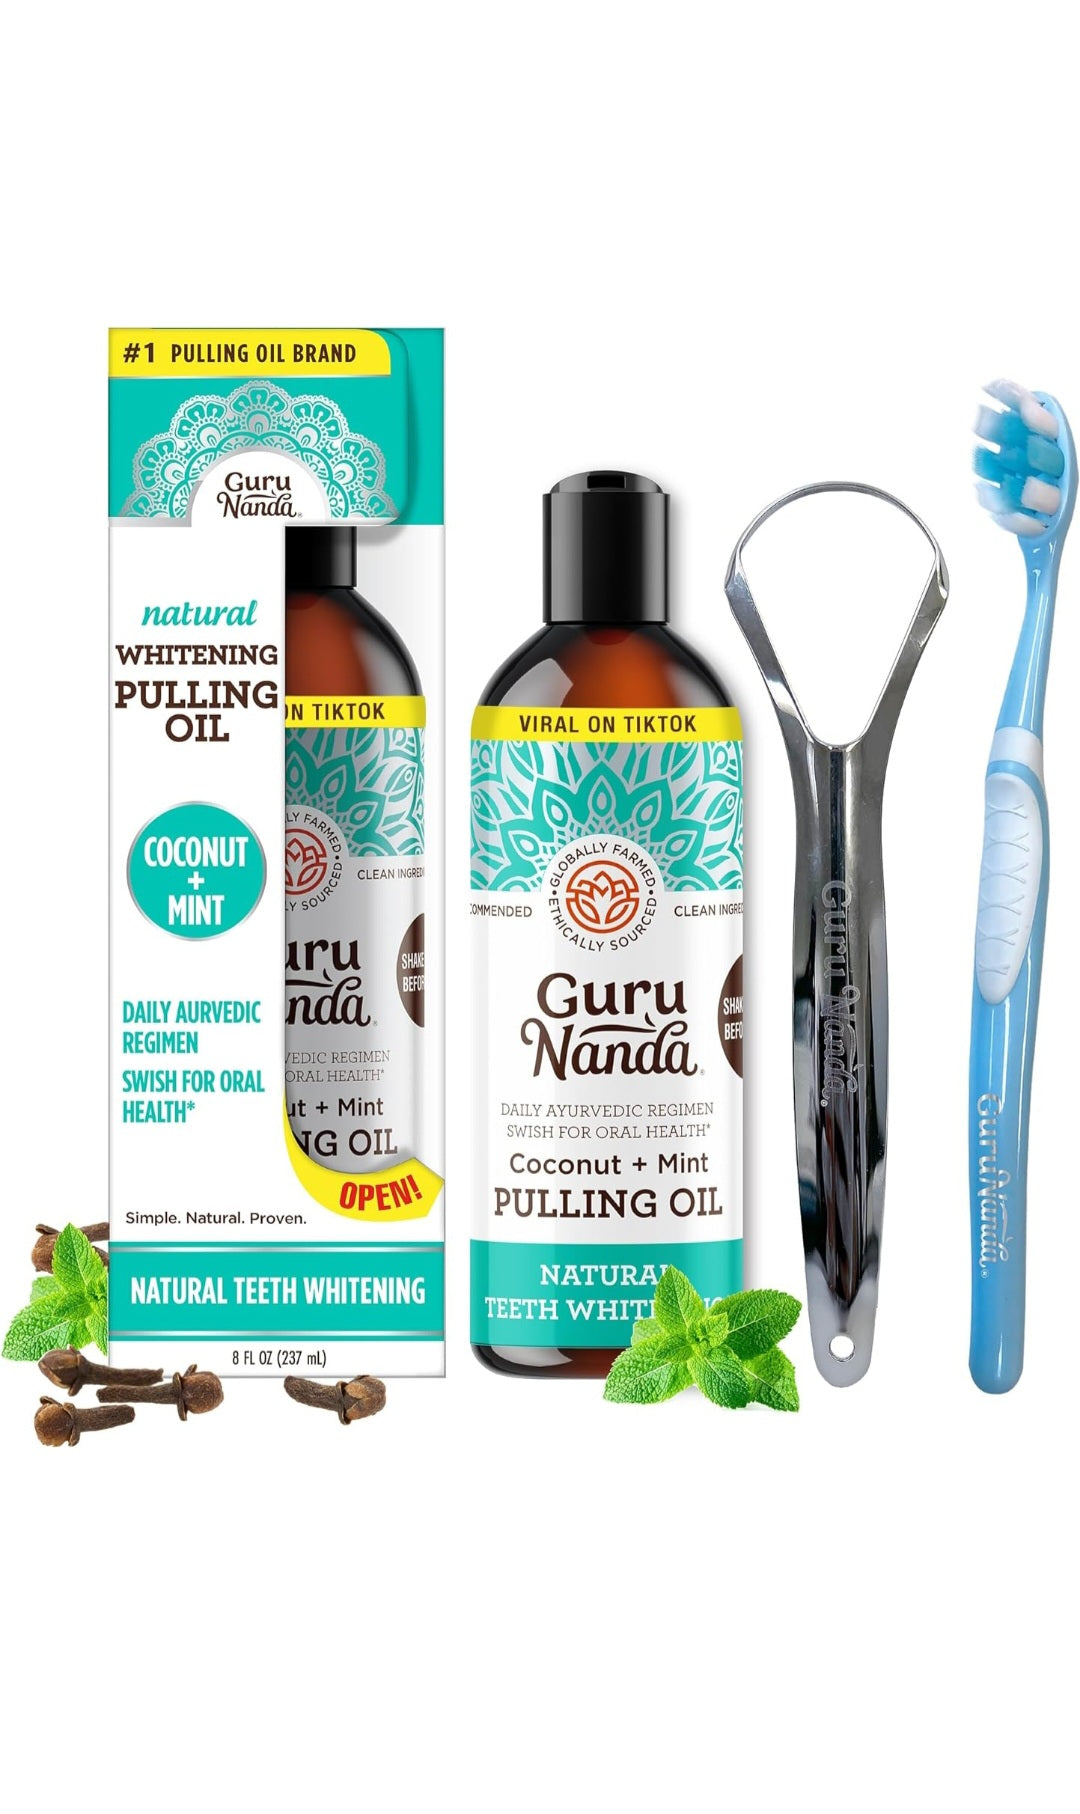 Experience the natural whitening power of Guru Nanda Pulling Oil with coconut and mint for oral health.